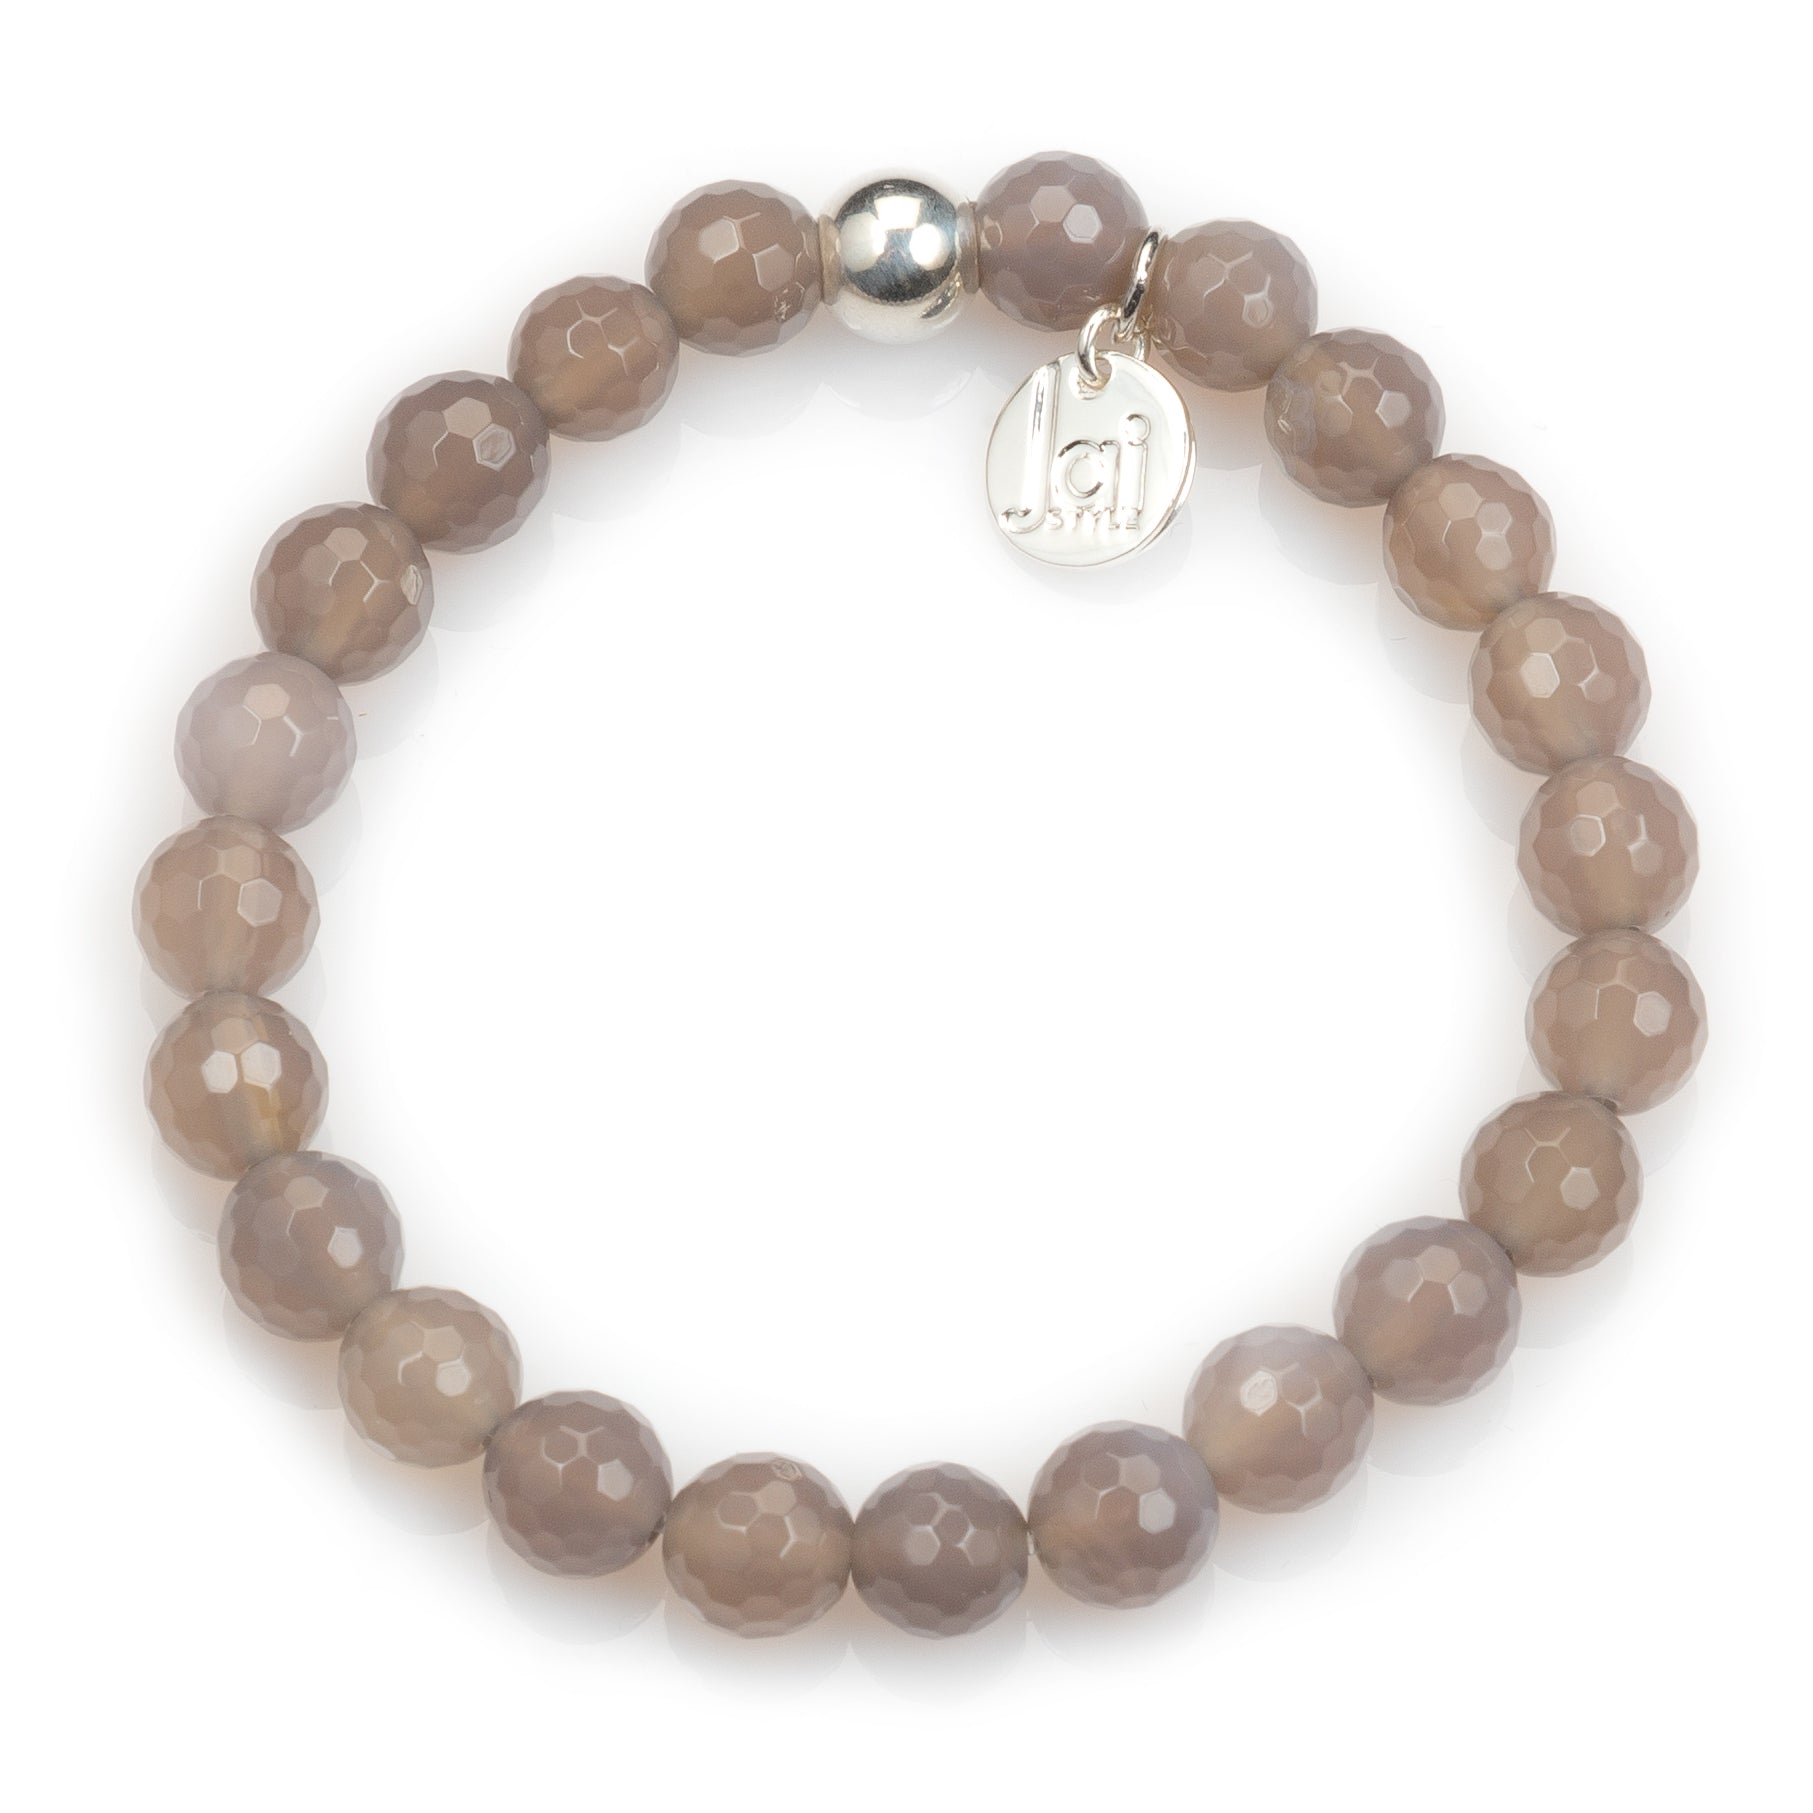 Faceted Grey Agate Bracelet with Silver Ball Bead